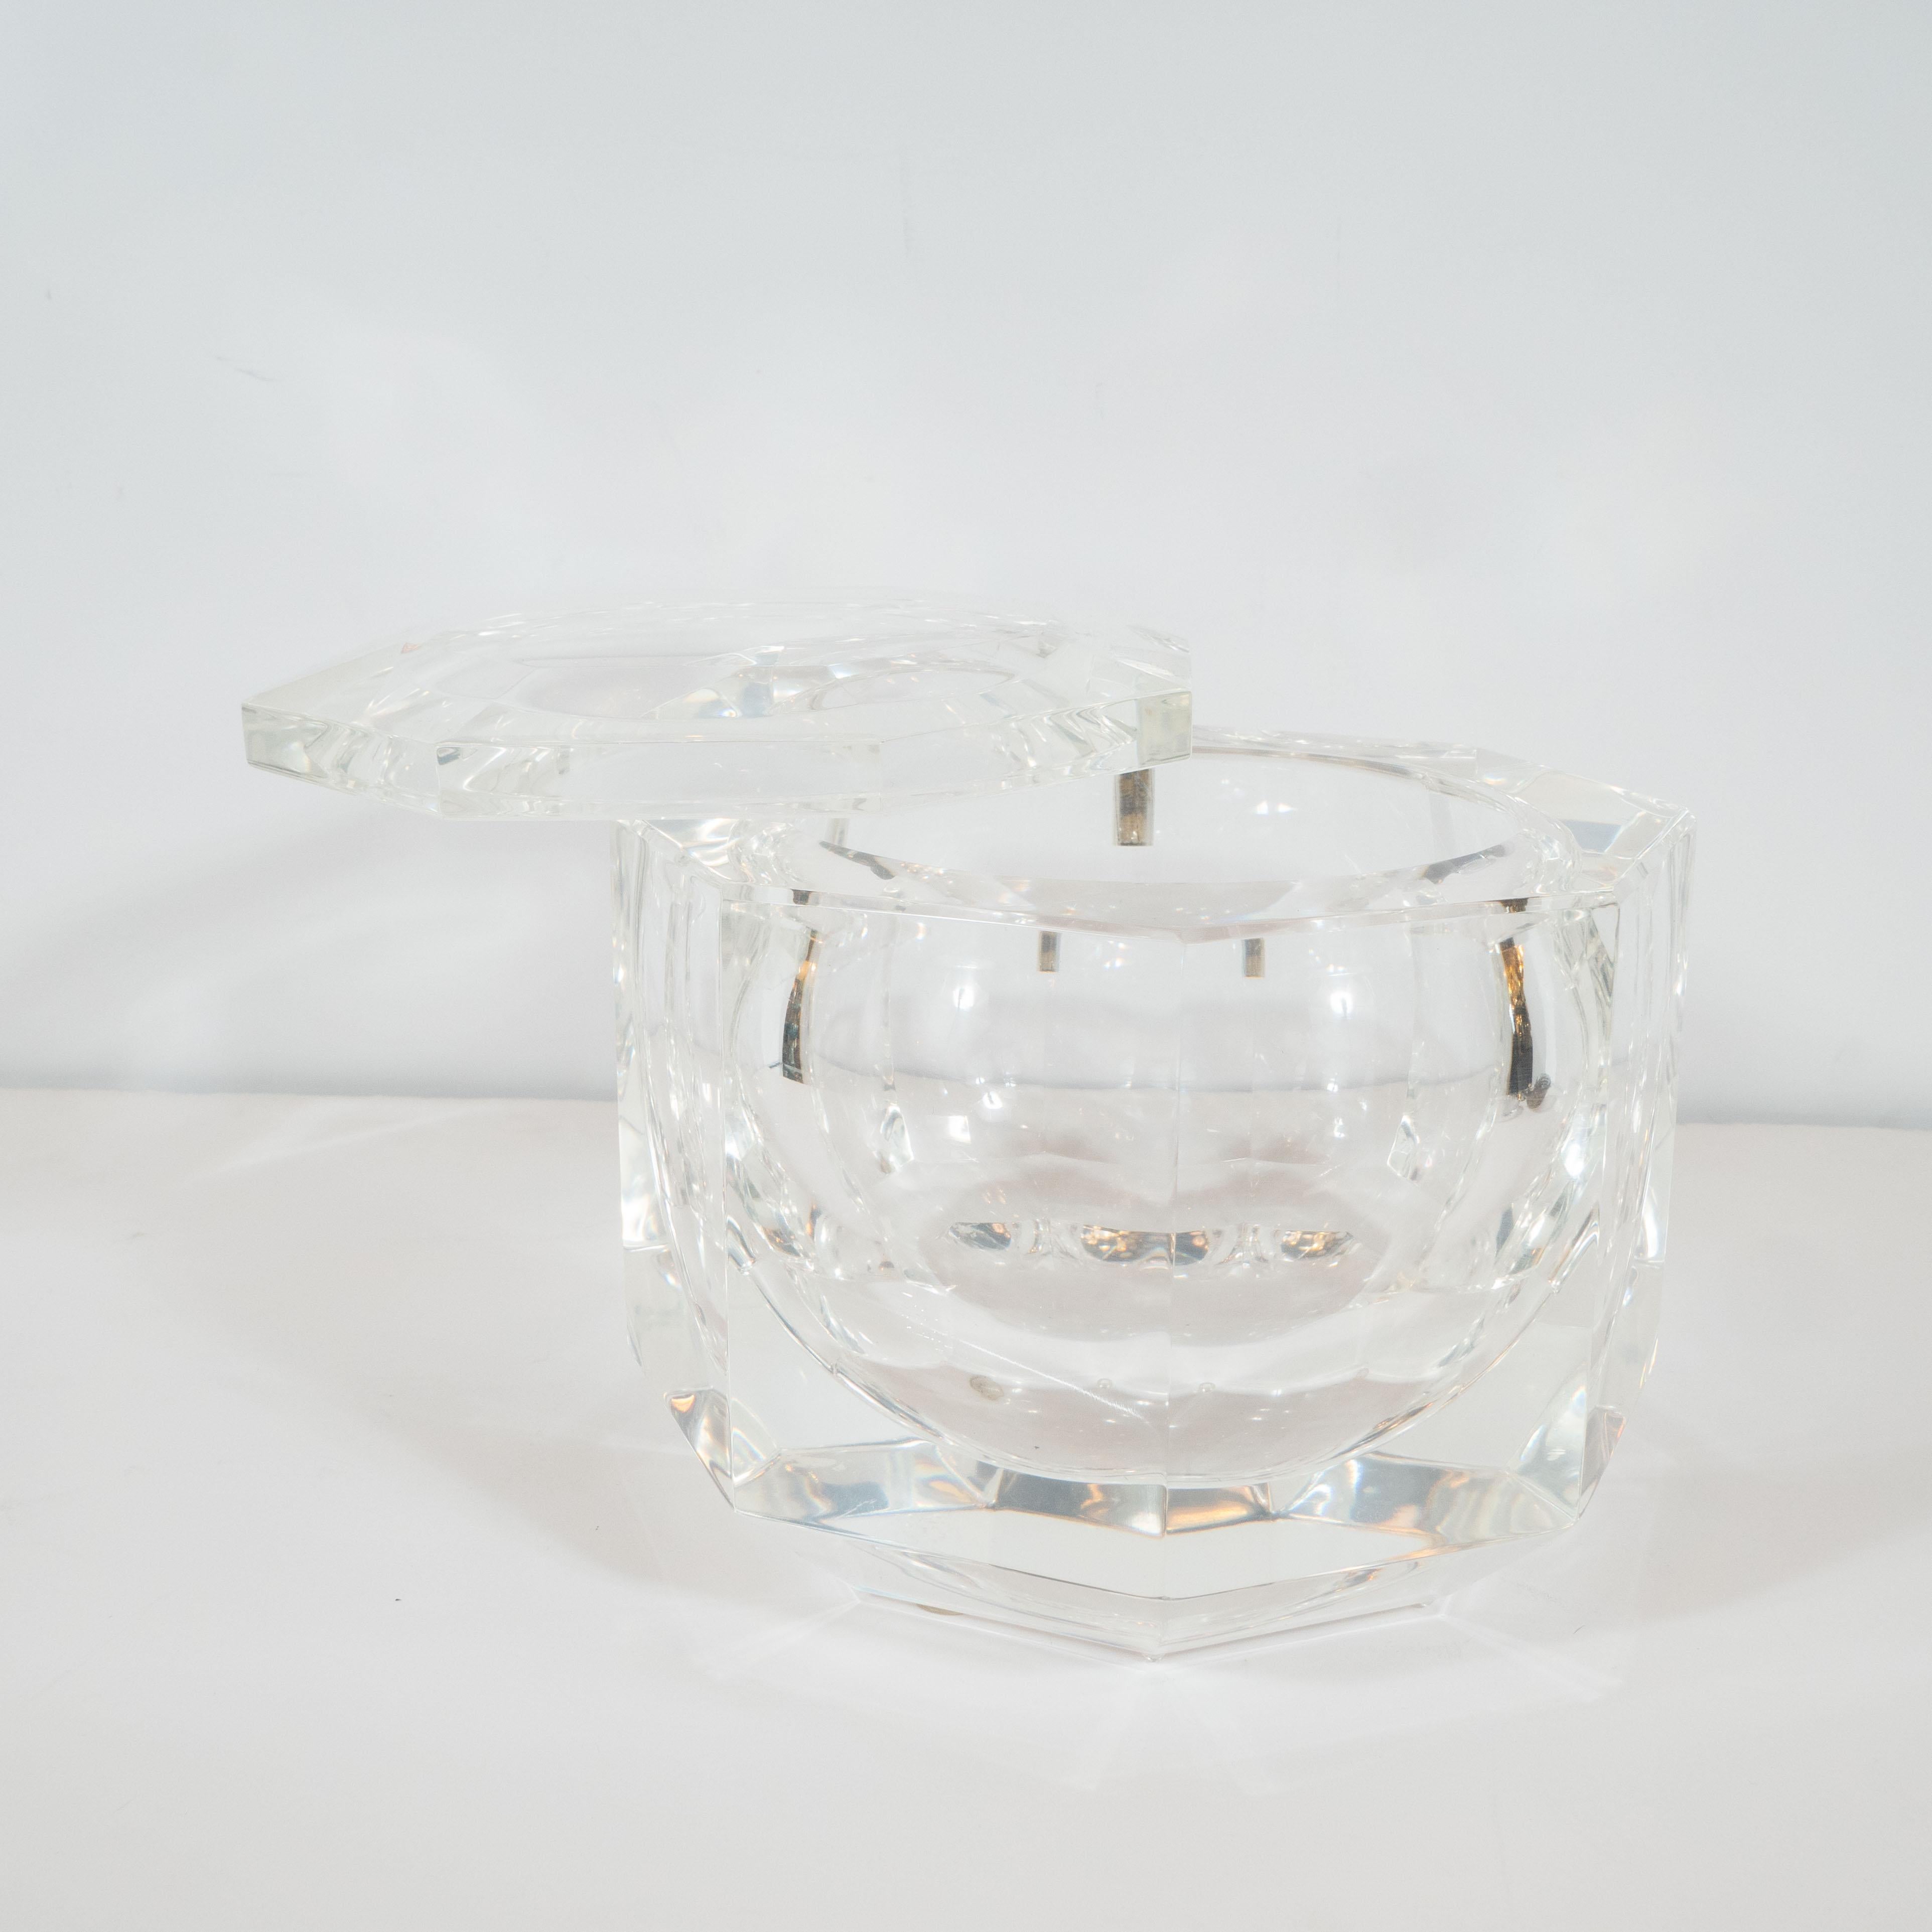 American Midcentury Faceted Swivel Top Lucite Octagon Ice Bucket by Carole Stupell